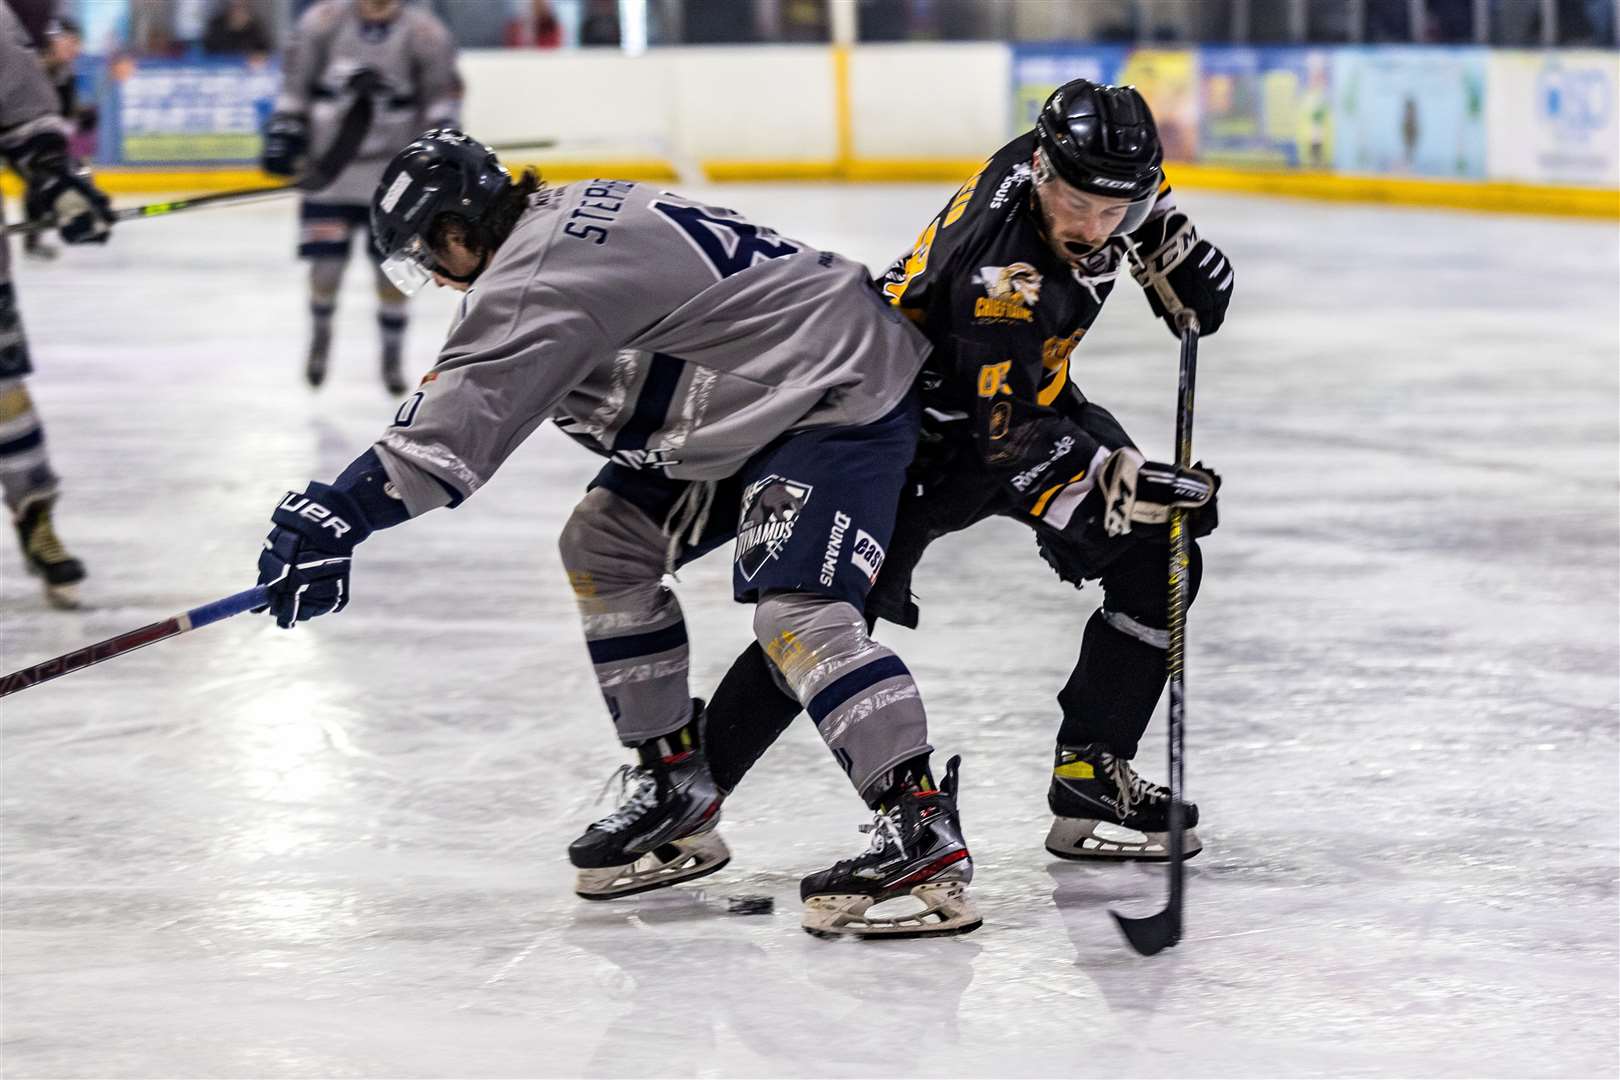 Joe Stephenson for Invicta Dynamos against Chelmsford Chieftains Picture: David Trevallion